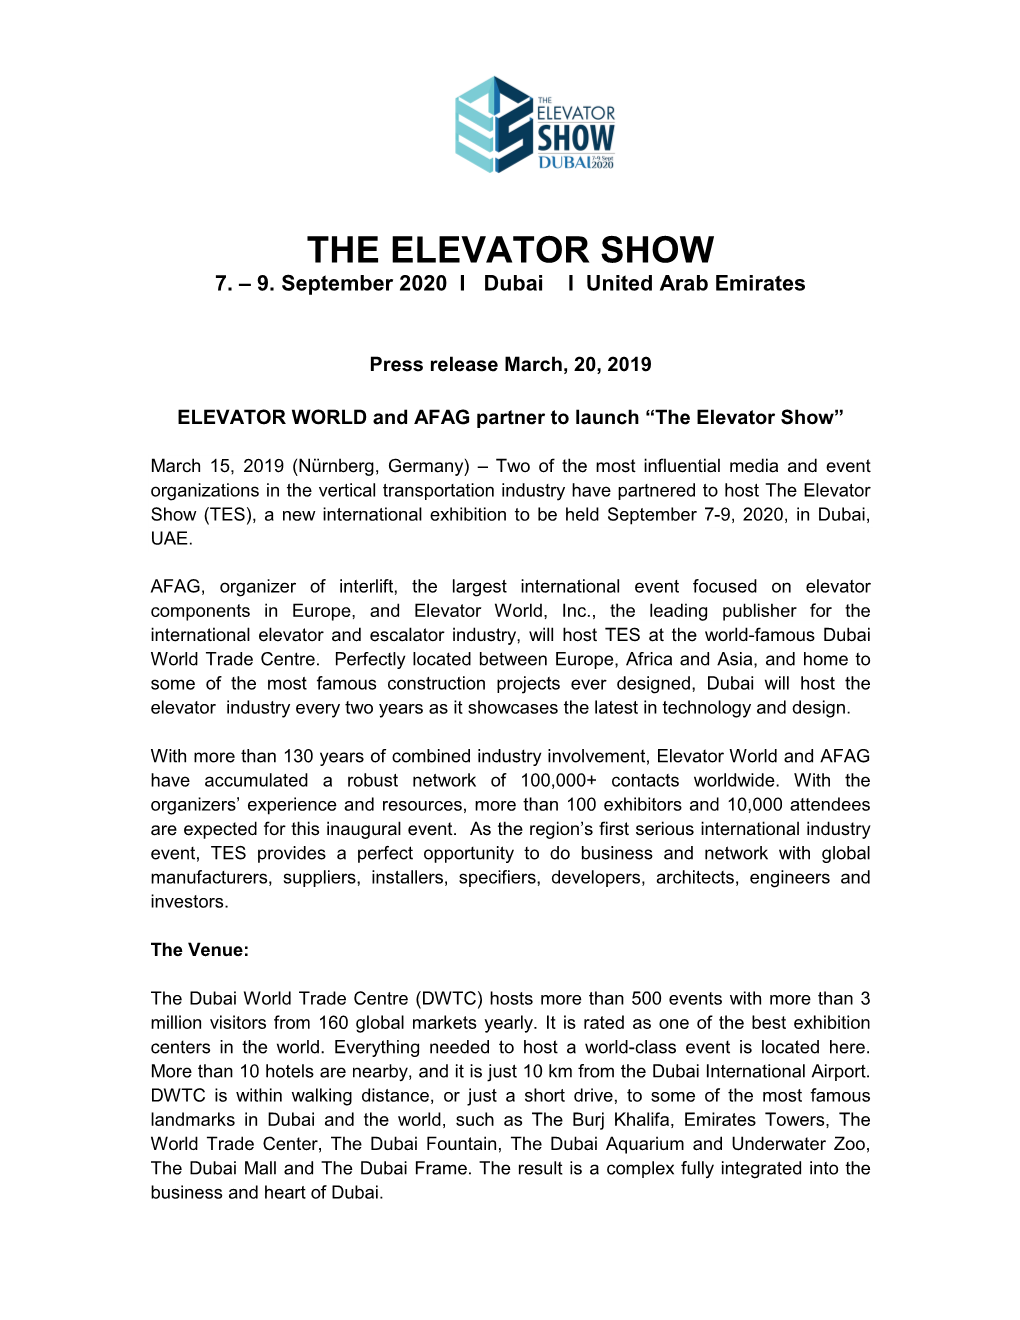 ELEVATOR WORLD and AFAG Partner to Launch "The Elevator Show"